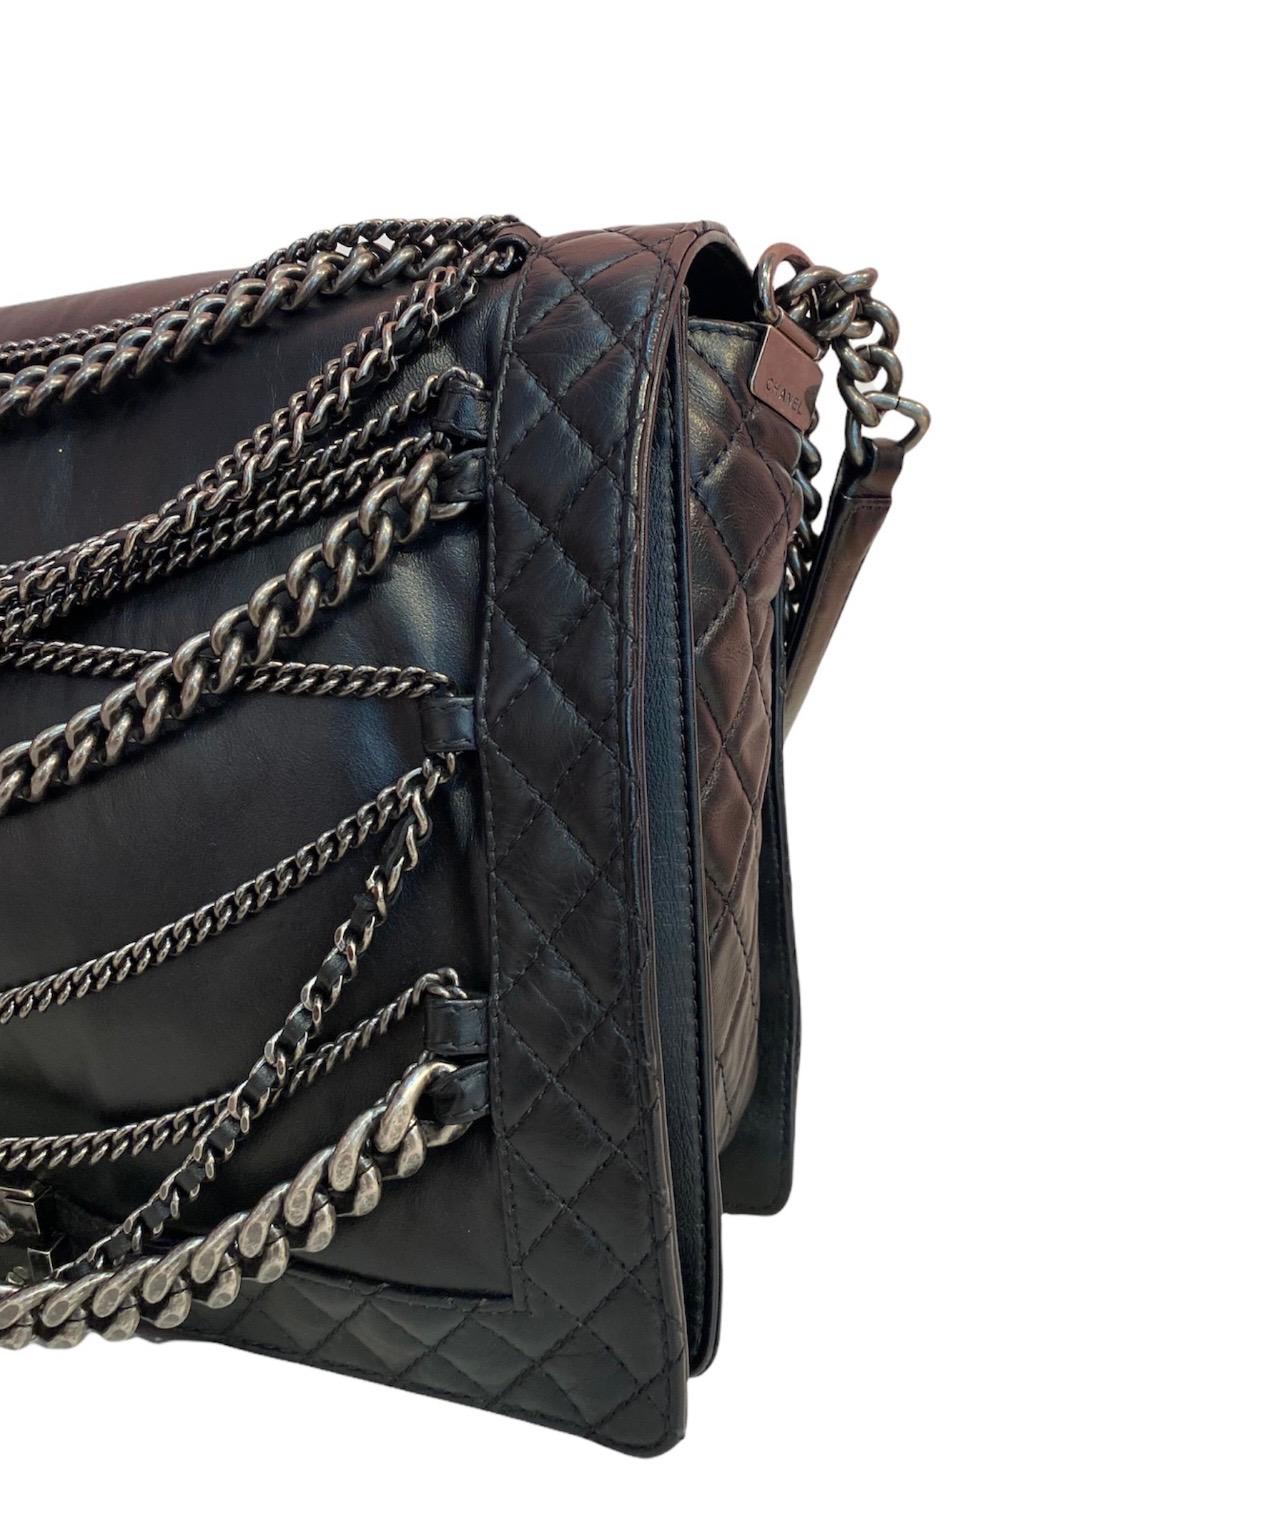 Limited Edition Chanel Multi Chain XL bag in black leather with silver hardware.  Features a front flap with CC interlocking closure. The interior is lined with a black fabric.  The bag is equipped with a silver chain shoulder strap with a leather